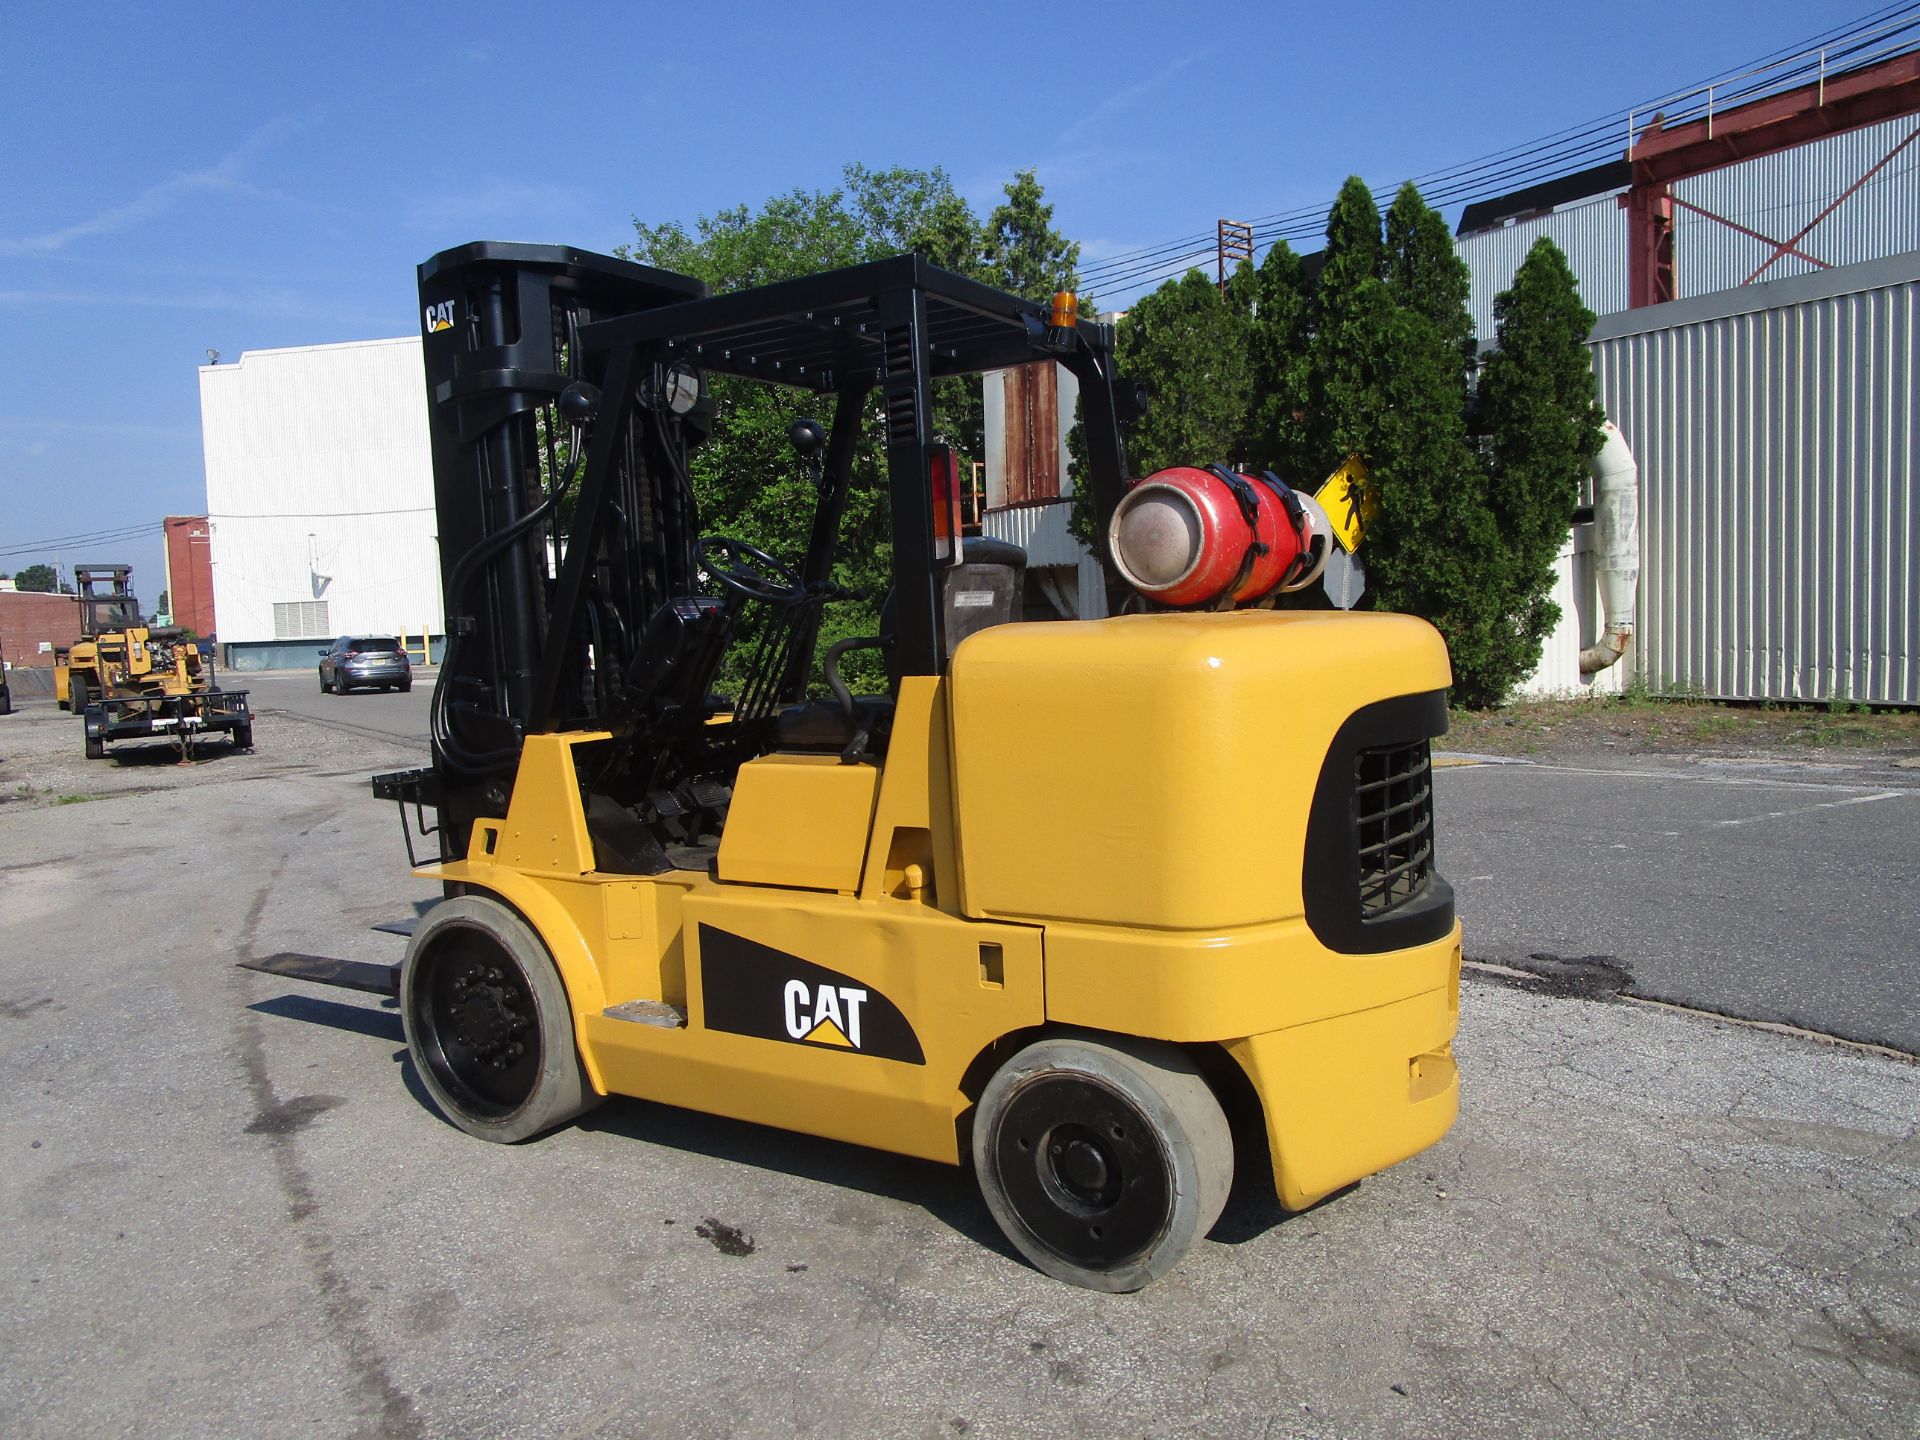 Caterpillar GC60K 13,000lb Forklift - Located in Lester, PA - Image 3 of 10